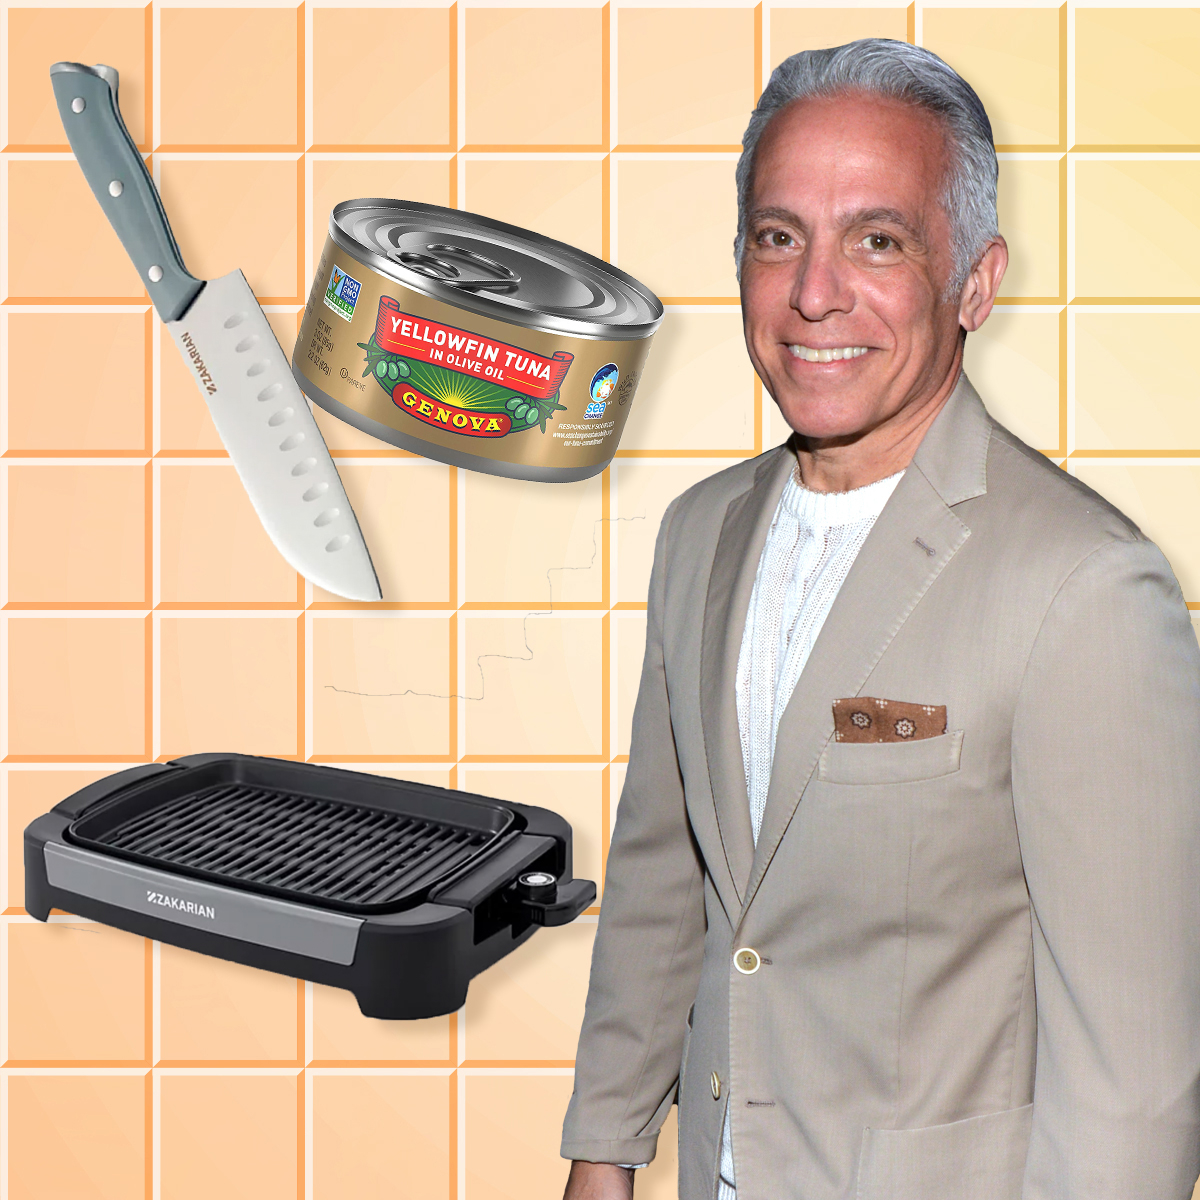 https://akns-images.eonline.com/eol_images/Entire_Site/2021418/rs_1200x1200-210518160311-1200_tiles_Geoffrey-Zakarian-mp.jpg?fit=around%7C1080:1080&output-quality=90&crop=1080:1080;center,top